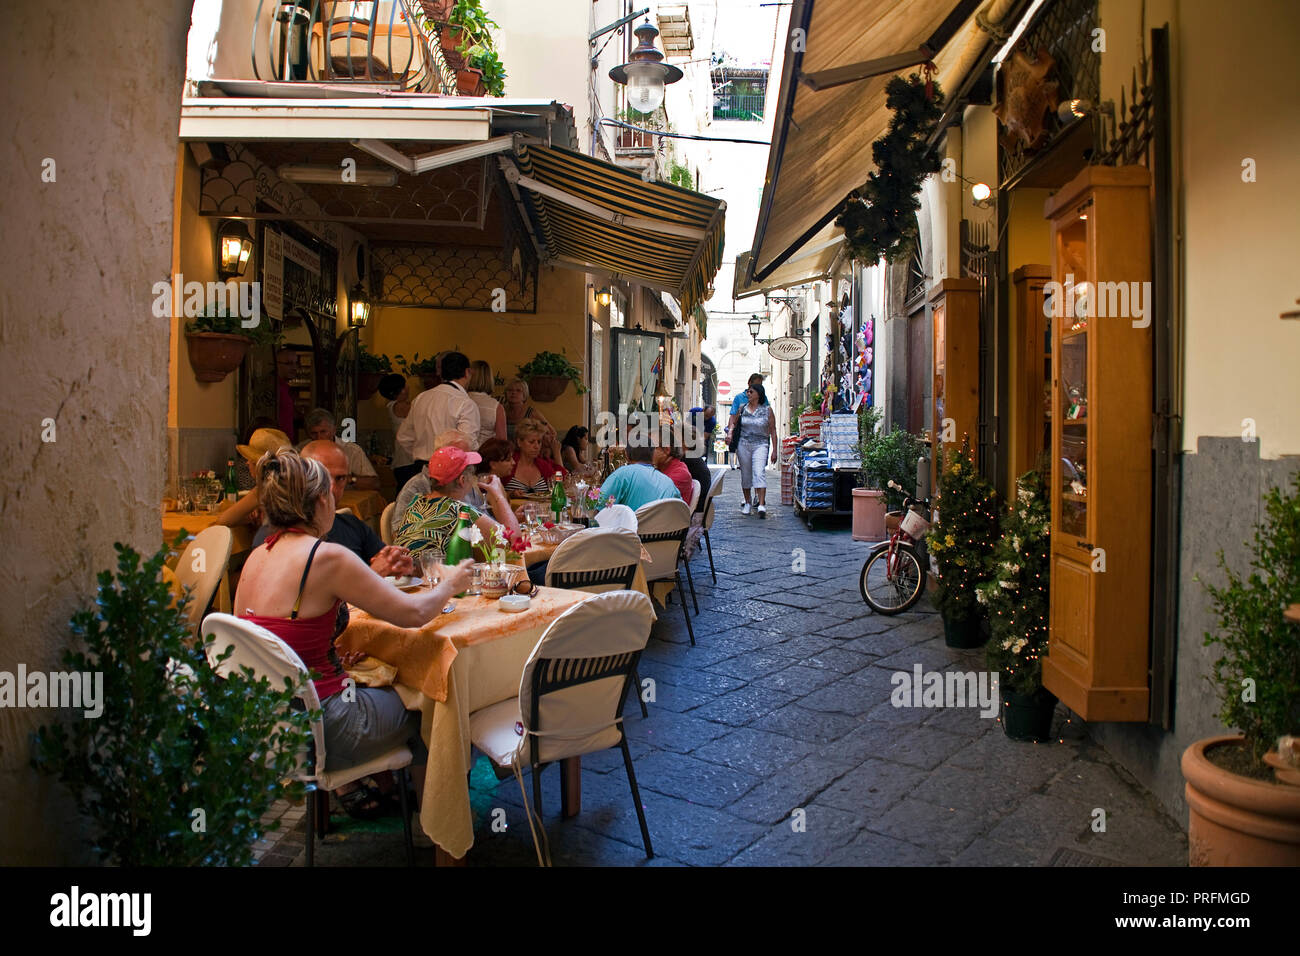 Restaurants and shops at a narrow alley, old town of Sorrento, Peninsula of Sorrento, Gulf of Naples, Campania, Italy Stock Photo